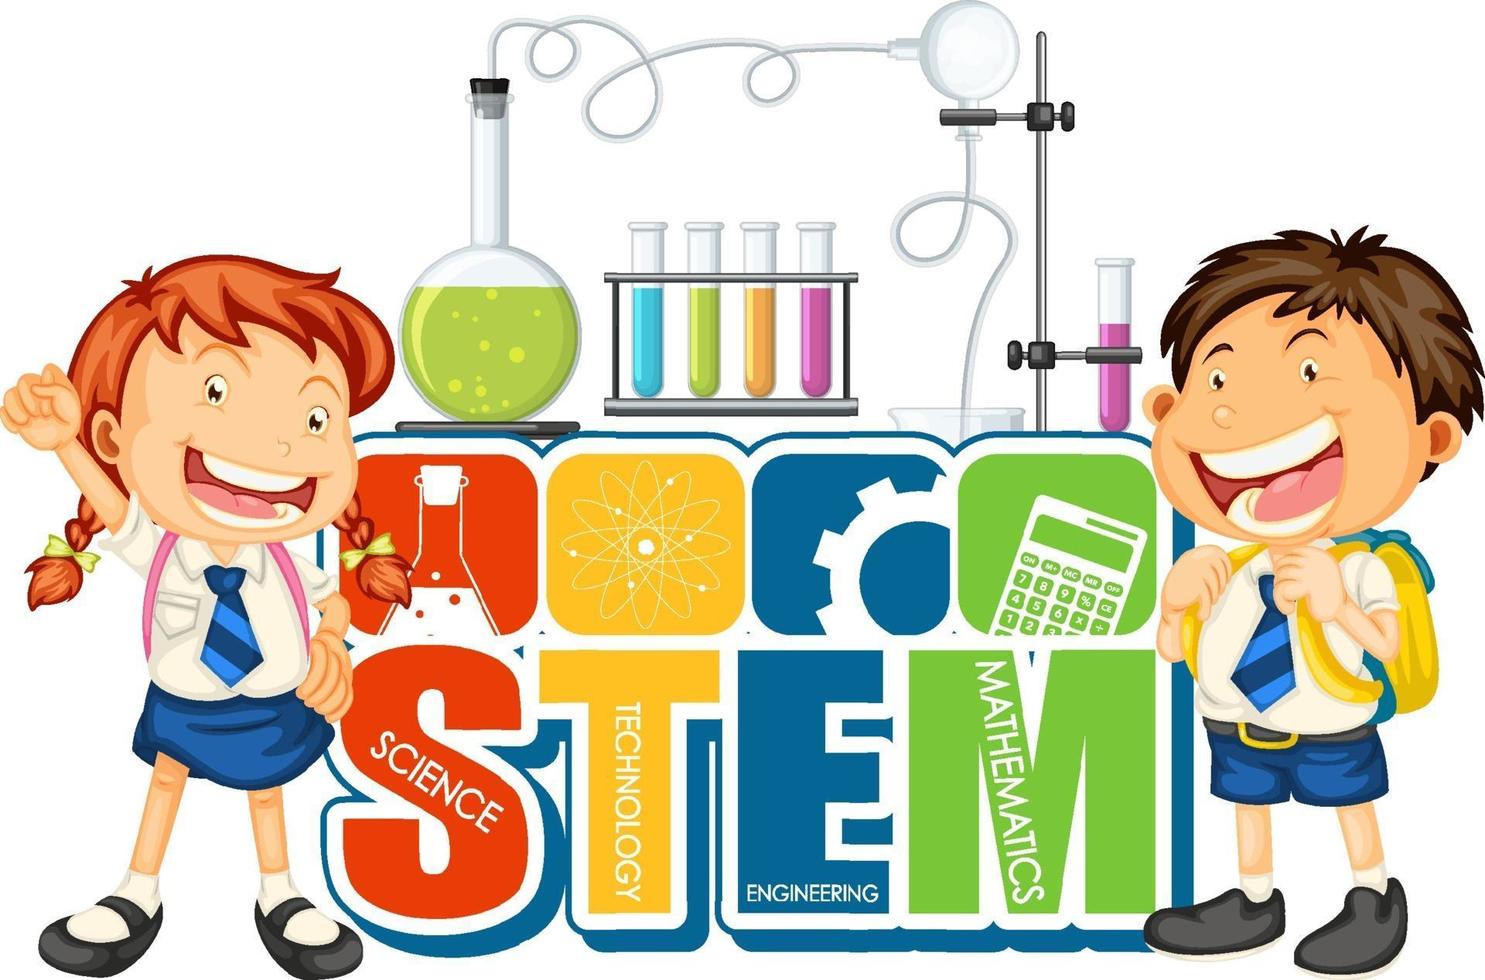 STEM education logo with student kids cartoon character vector